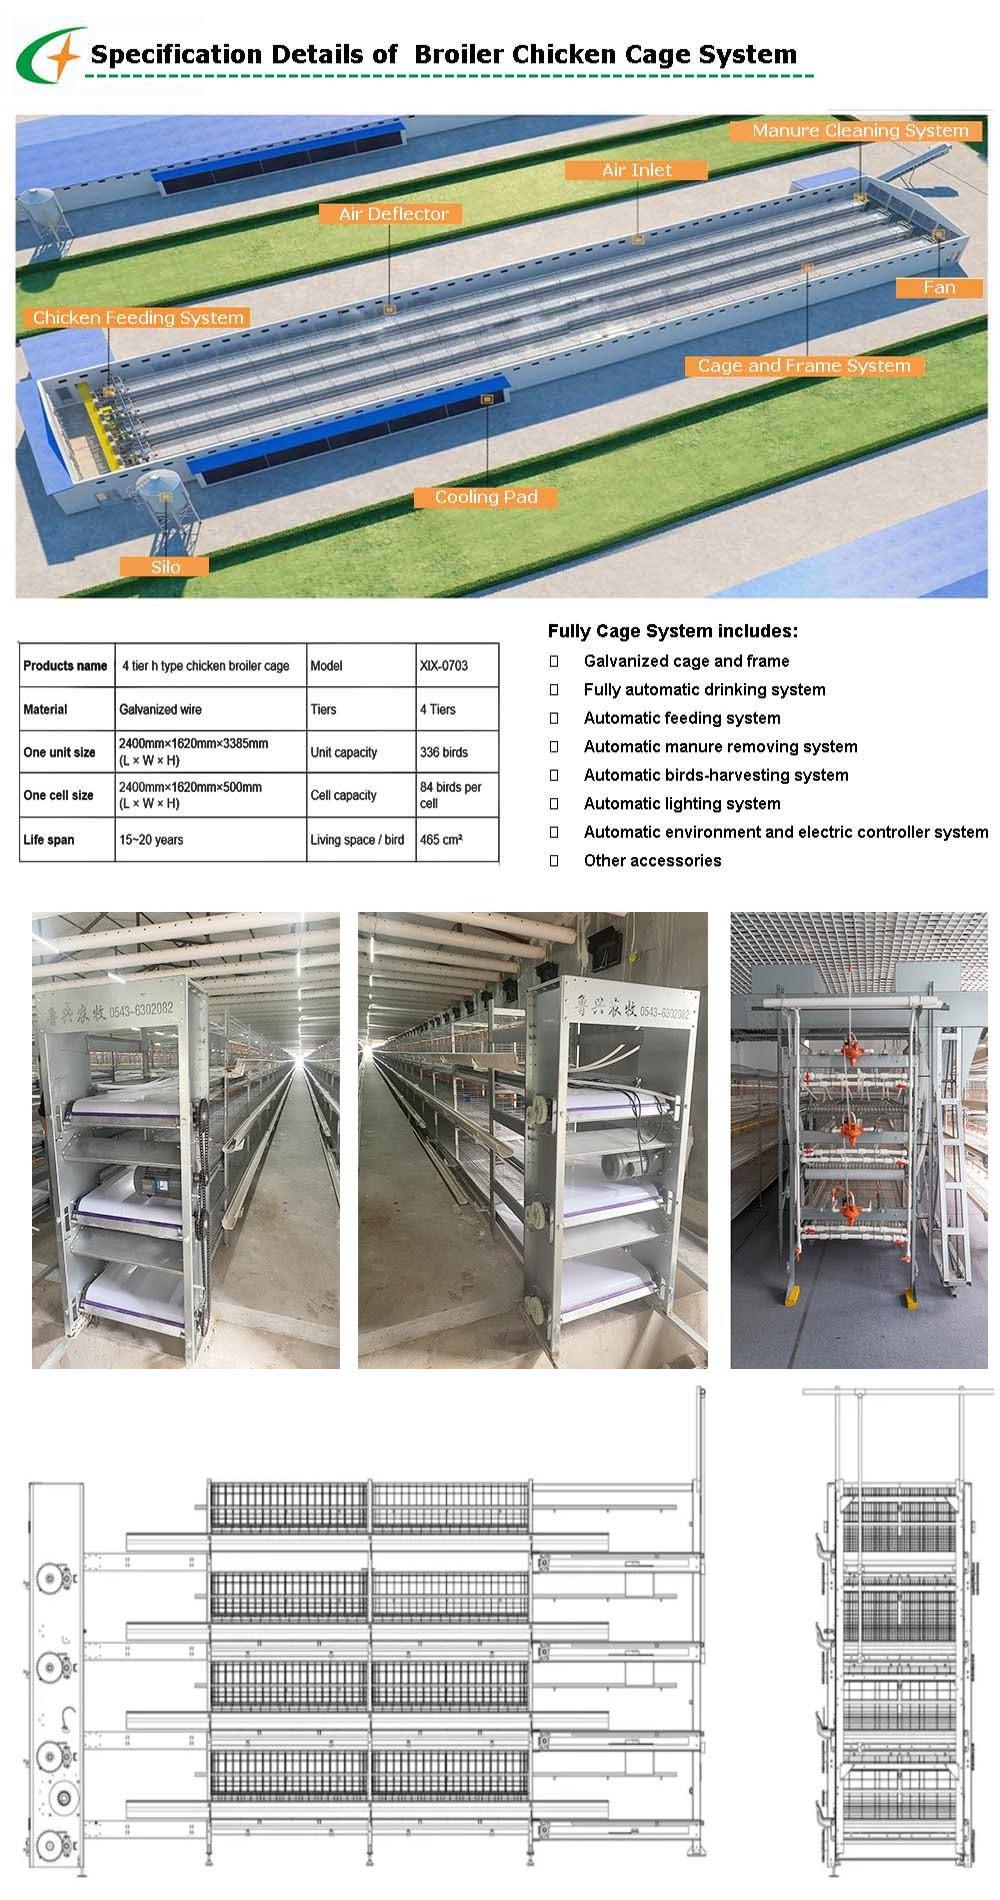 Poultry Husbandry Equipment for Rearing Broiler and Layer Chicken